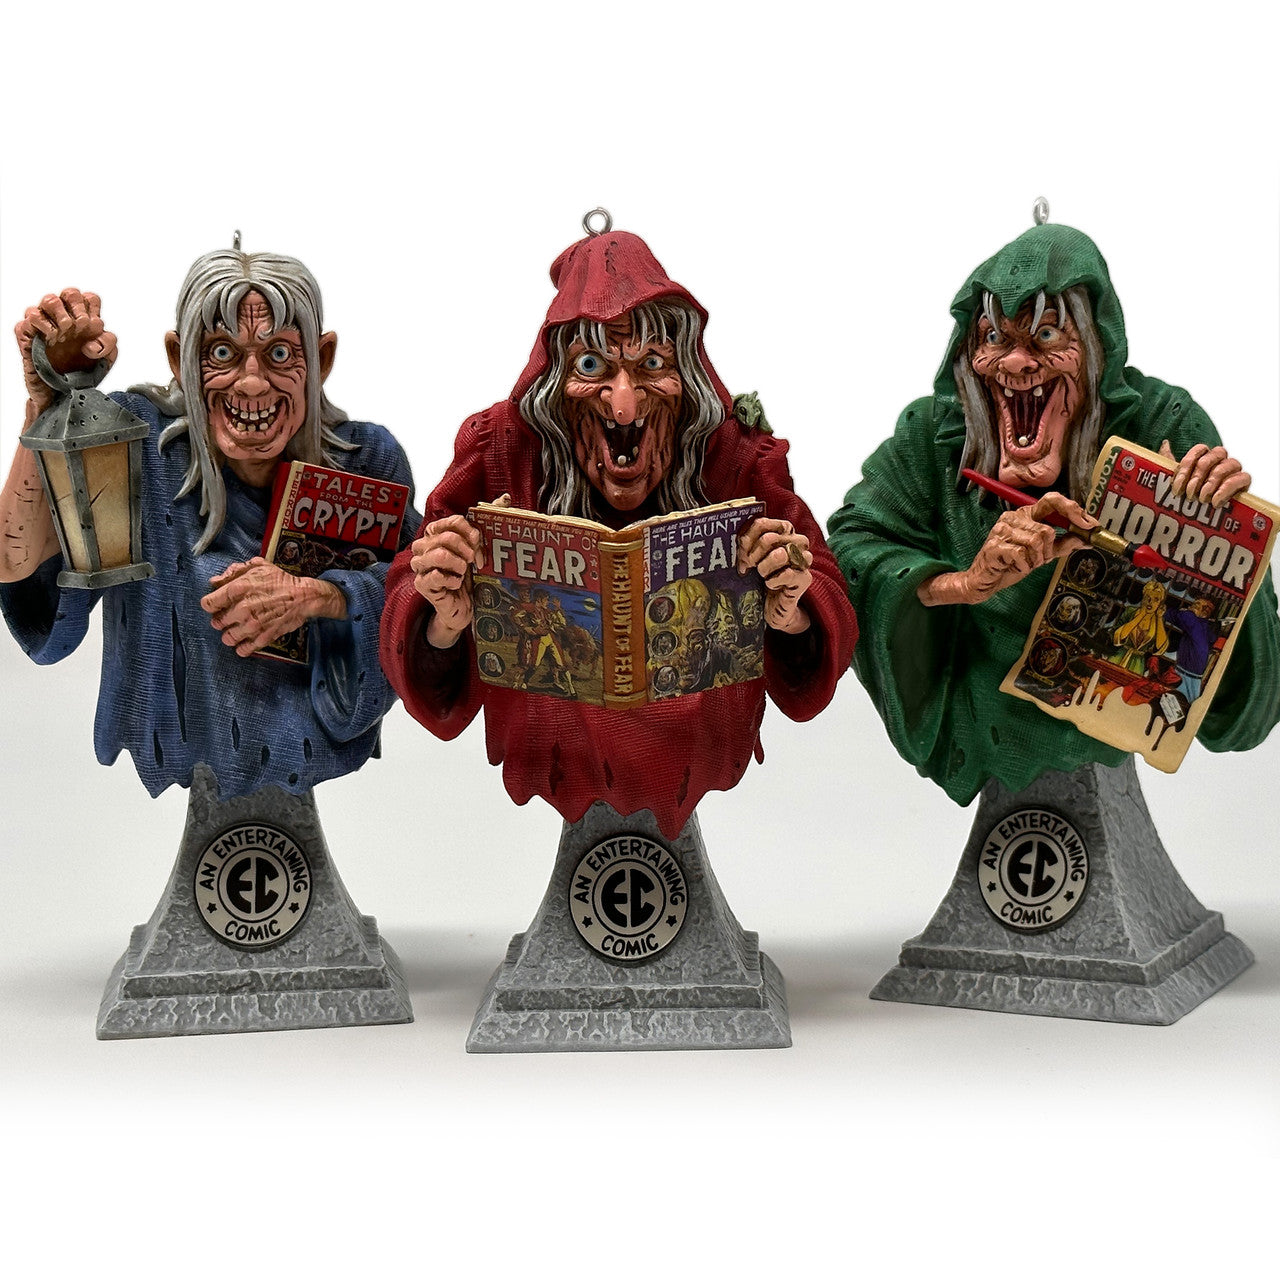 EC Comics "Tales from the Crypt" Masterpiece Ornament Set